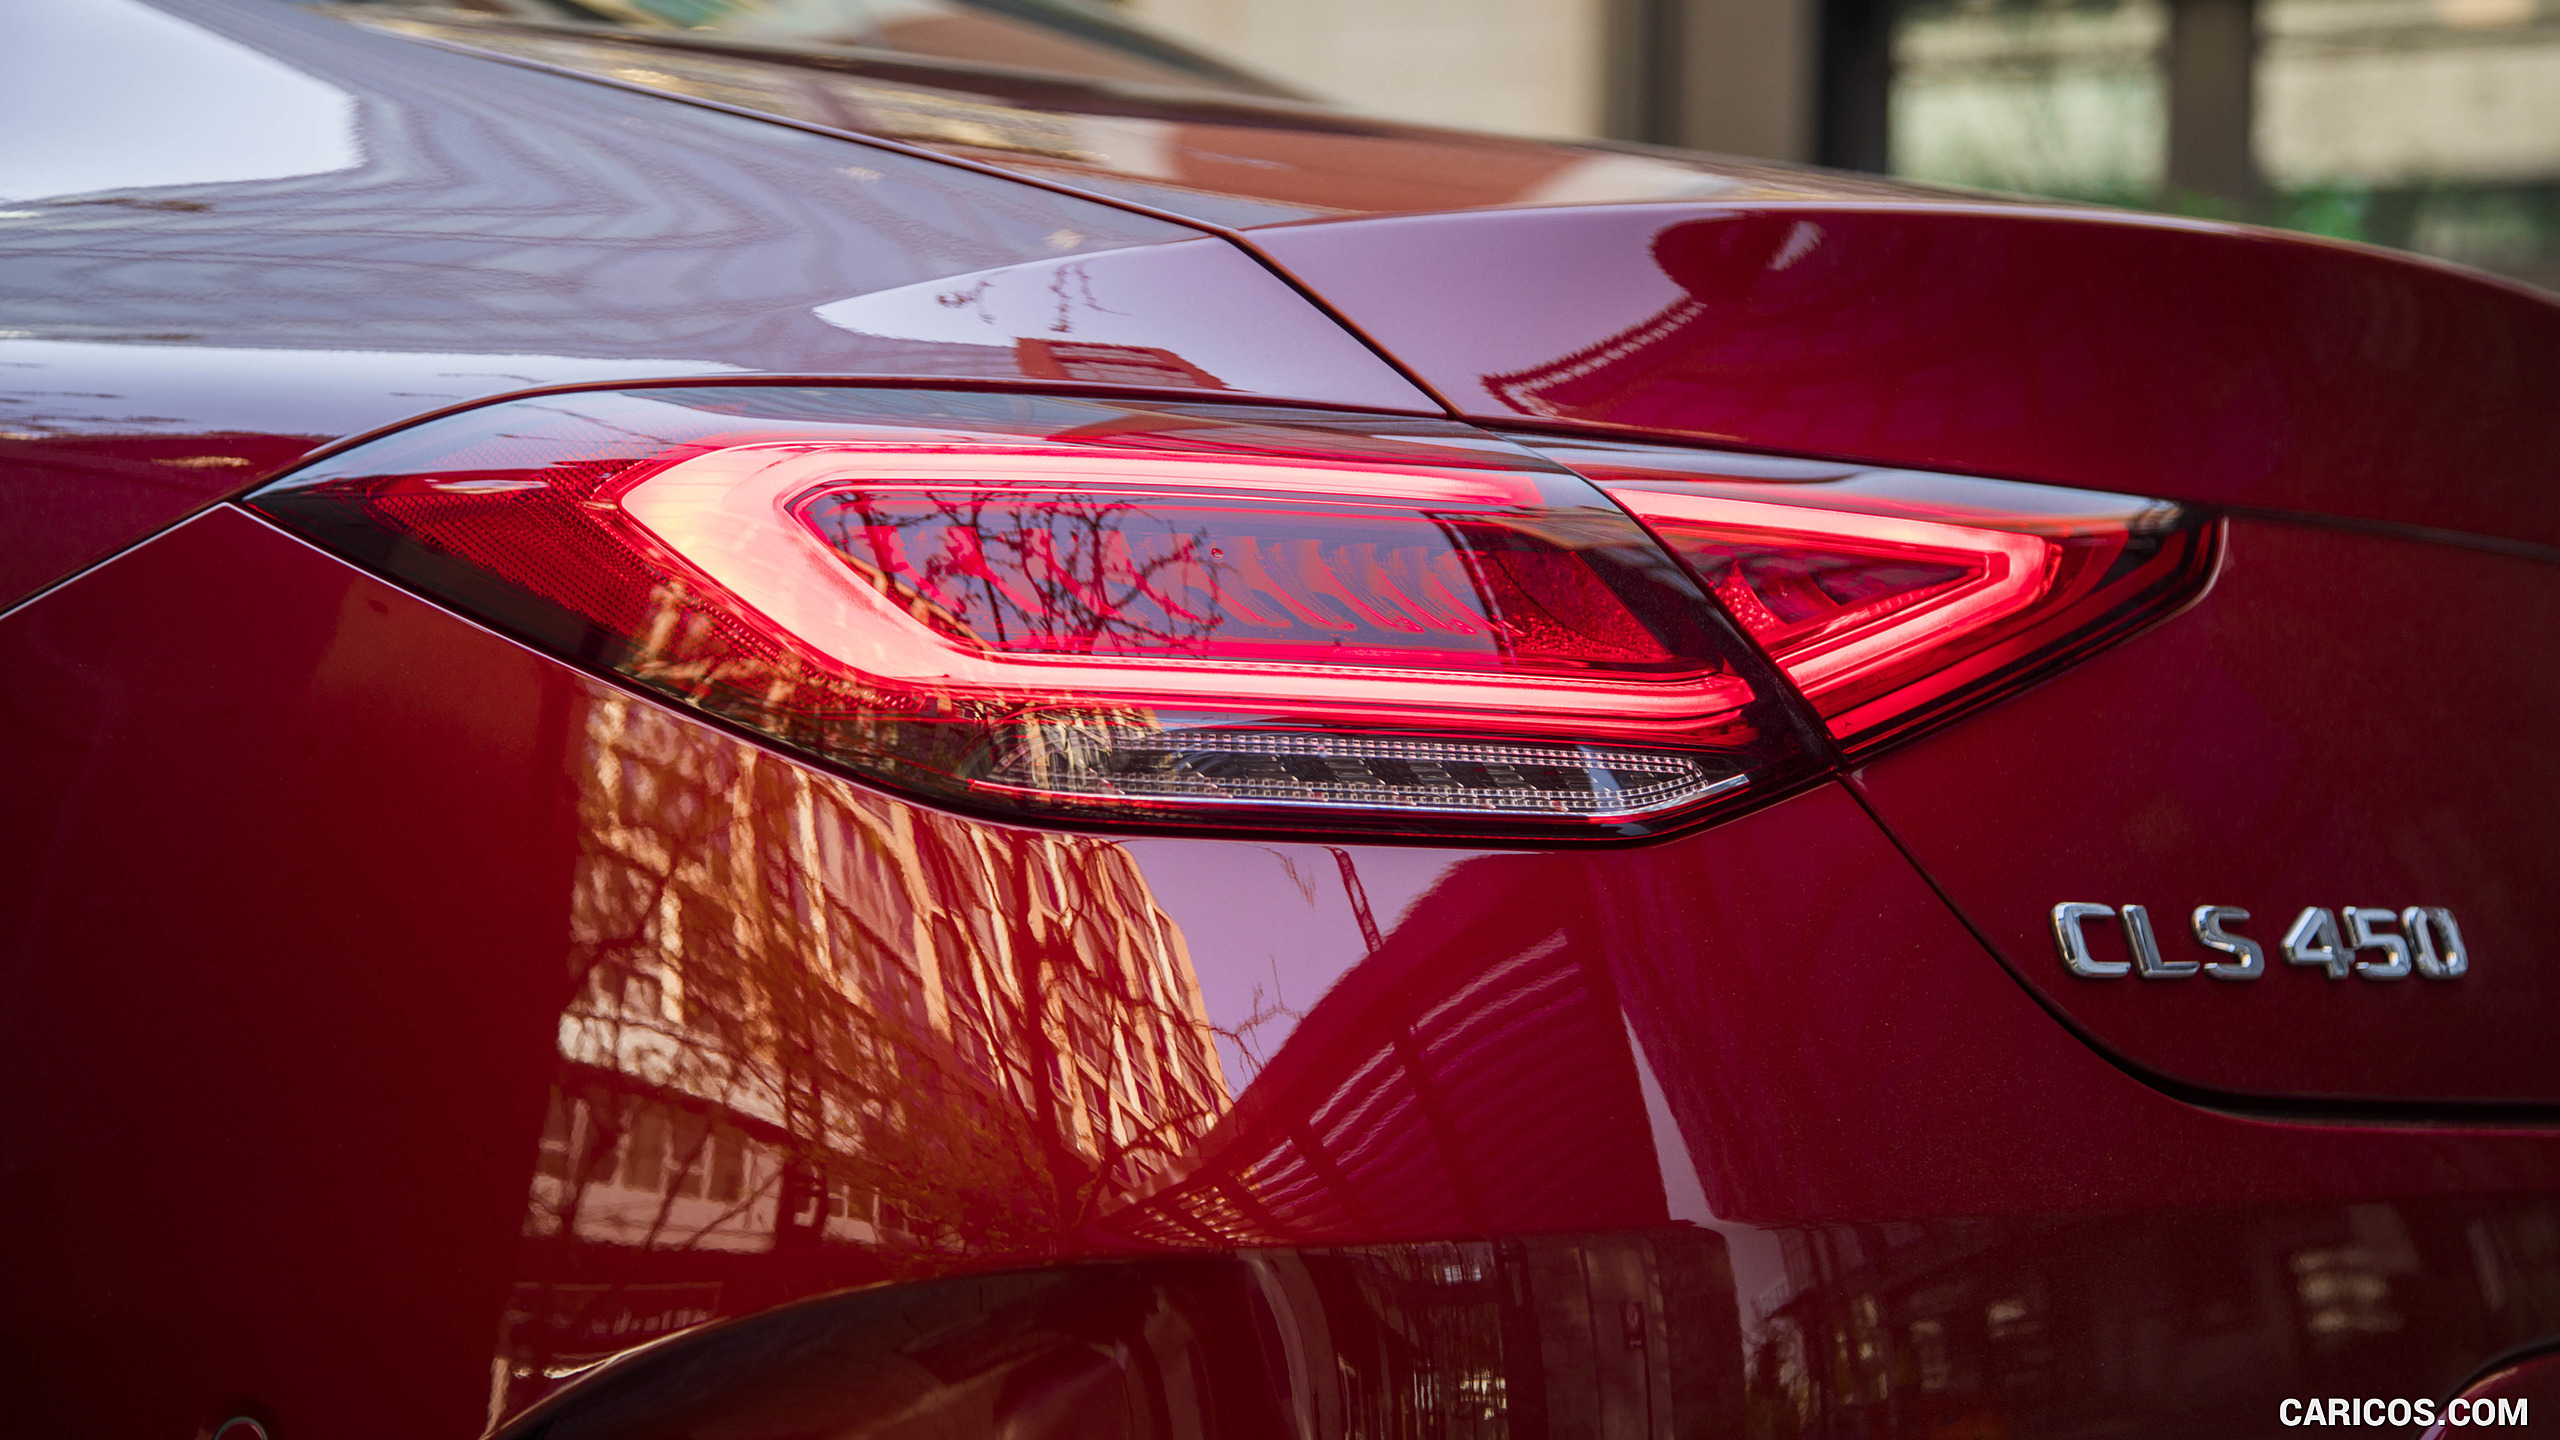 2019 Mercedes-Benz CLS 450 4MATIC (US-Spec) - Tail Light, #207 of 231